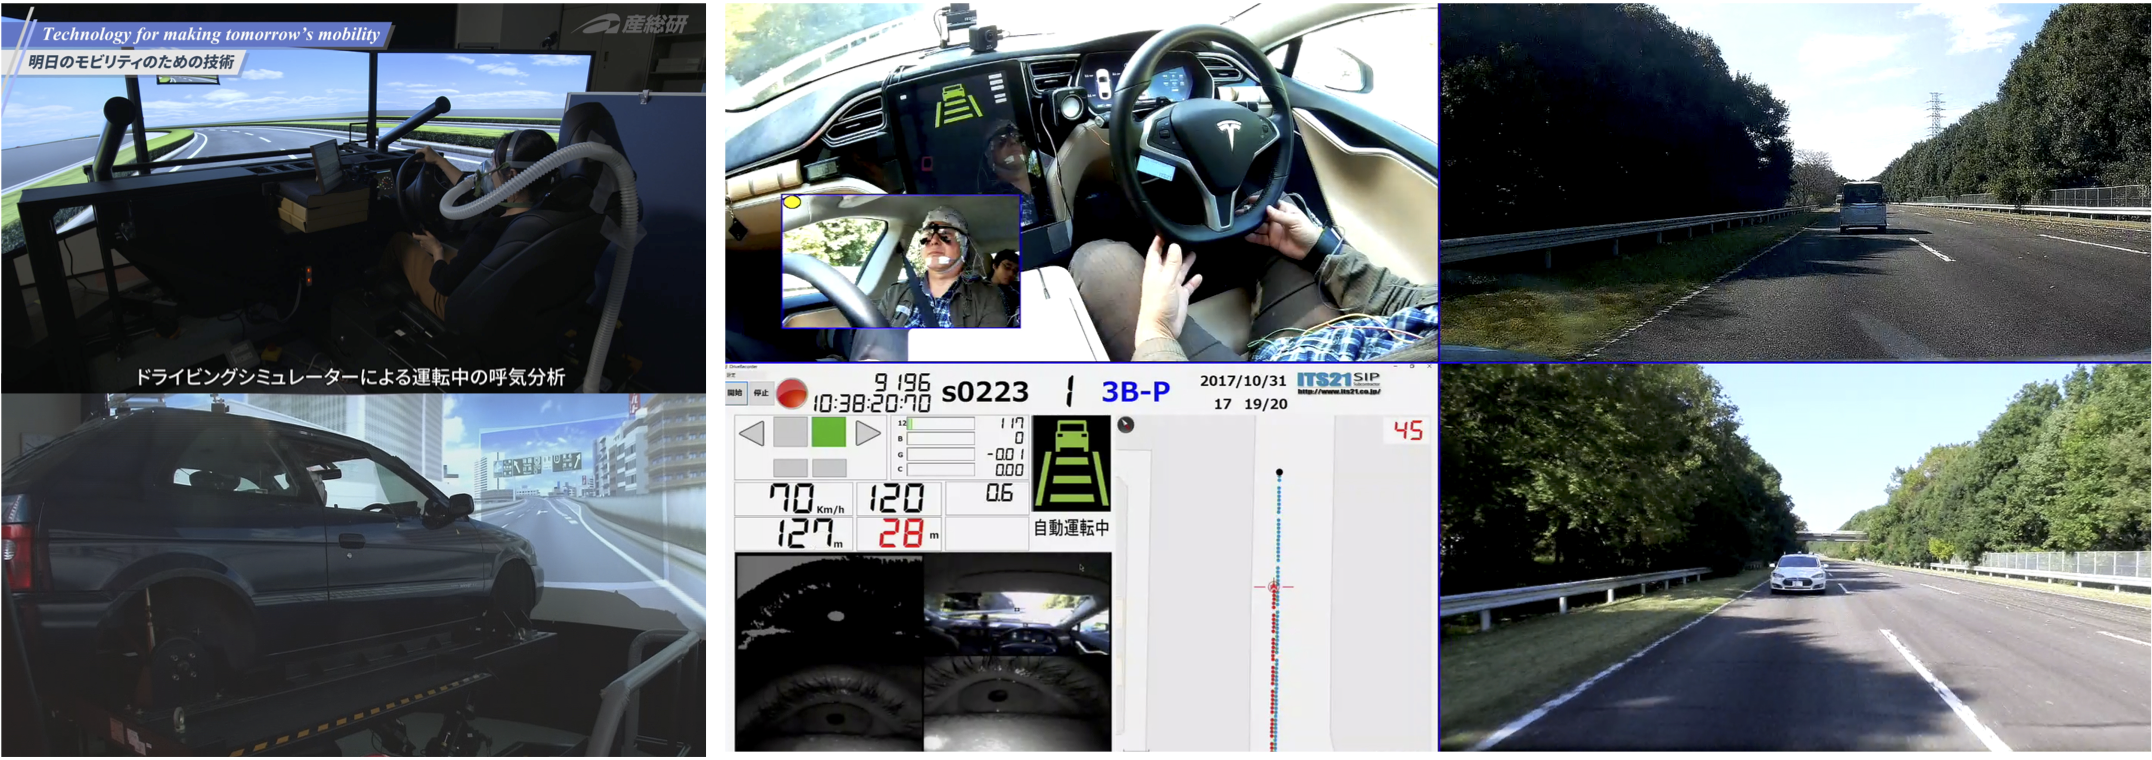 This figure shows the driving simulator.